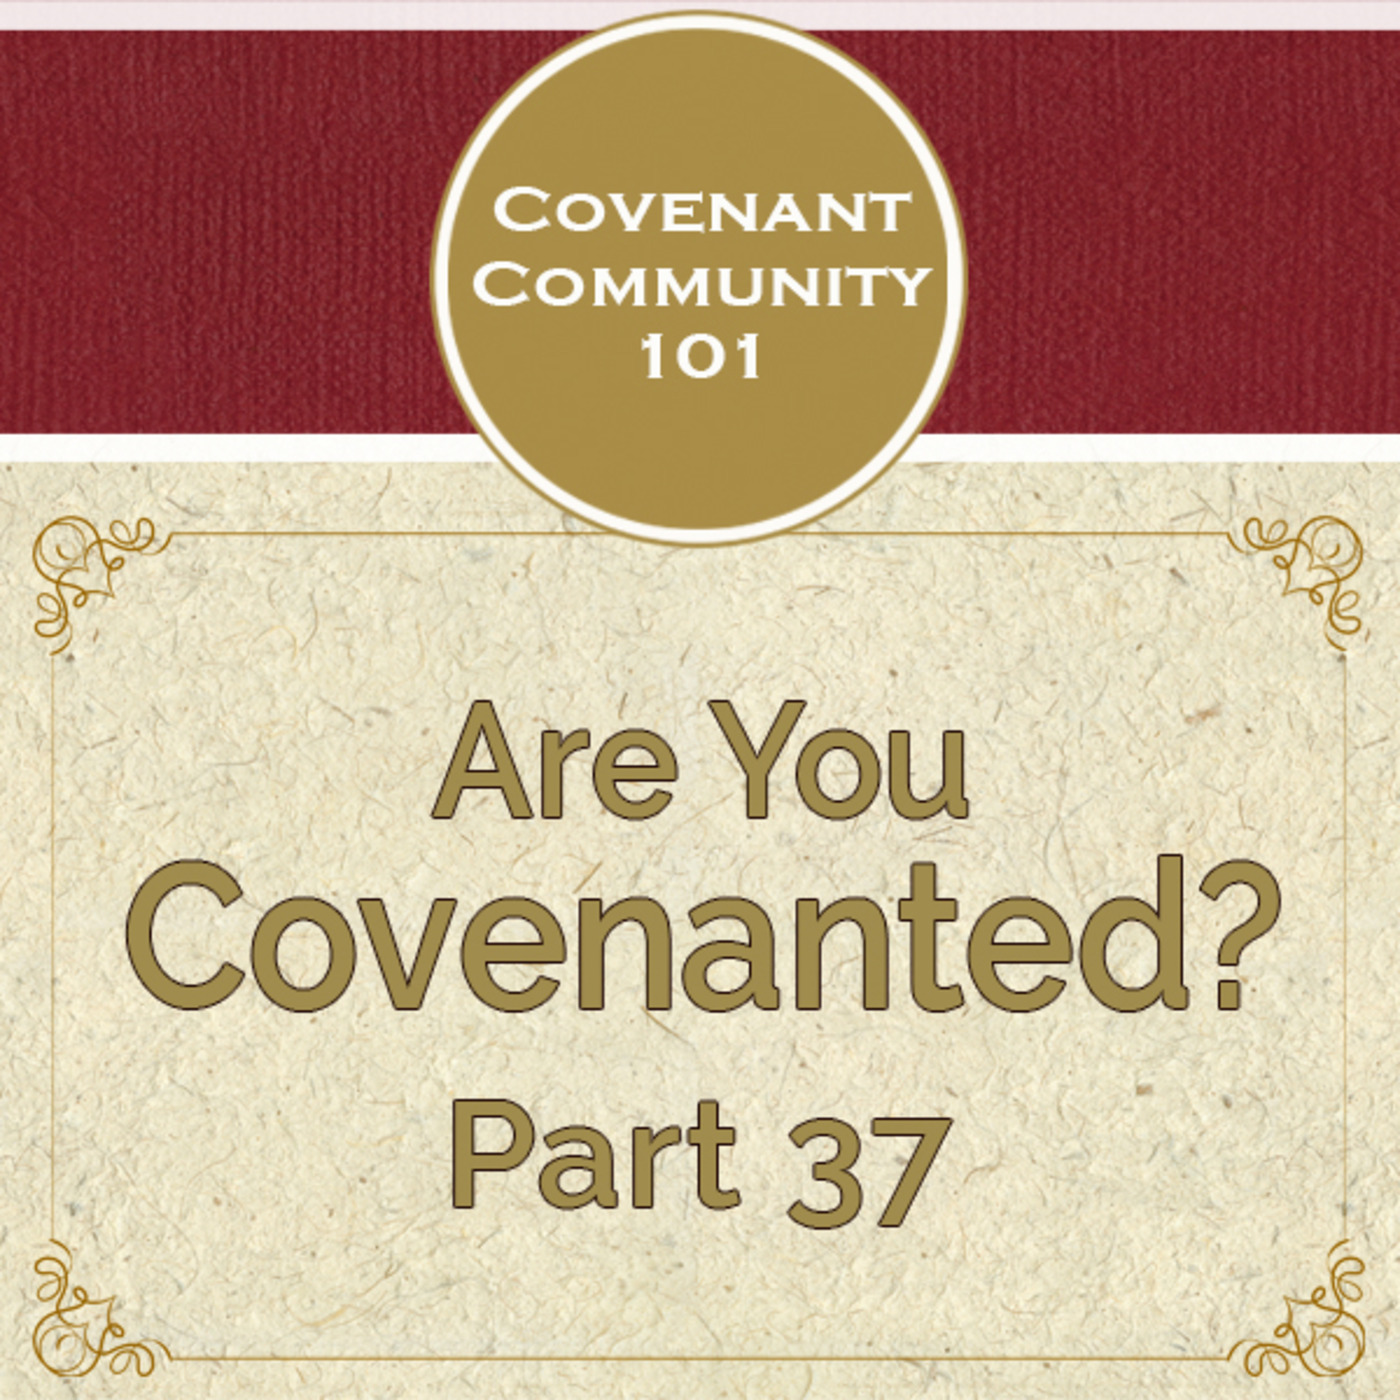 Covenant Community 101: Are You Covenanted? Part 37